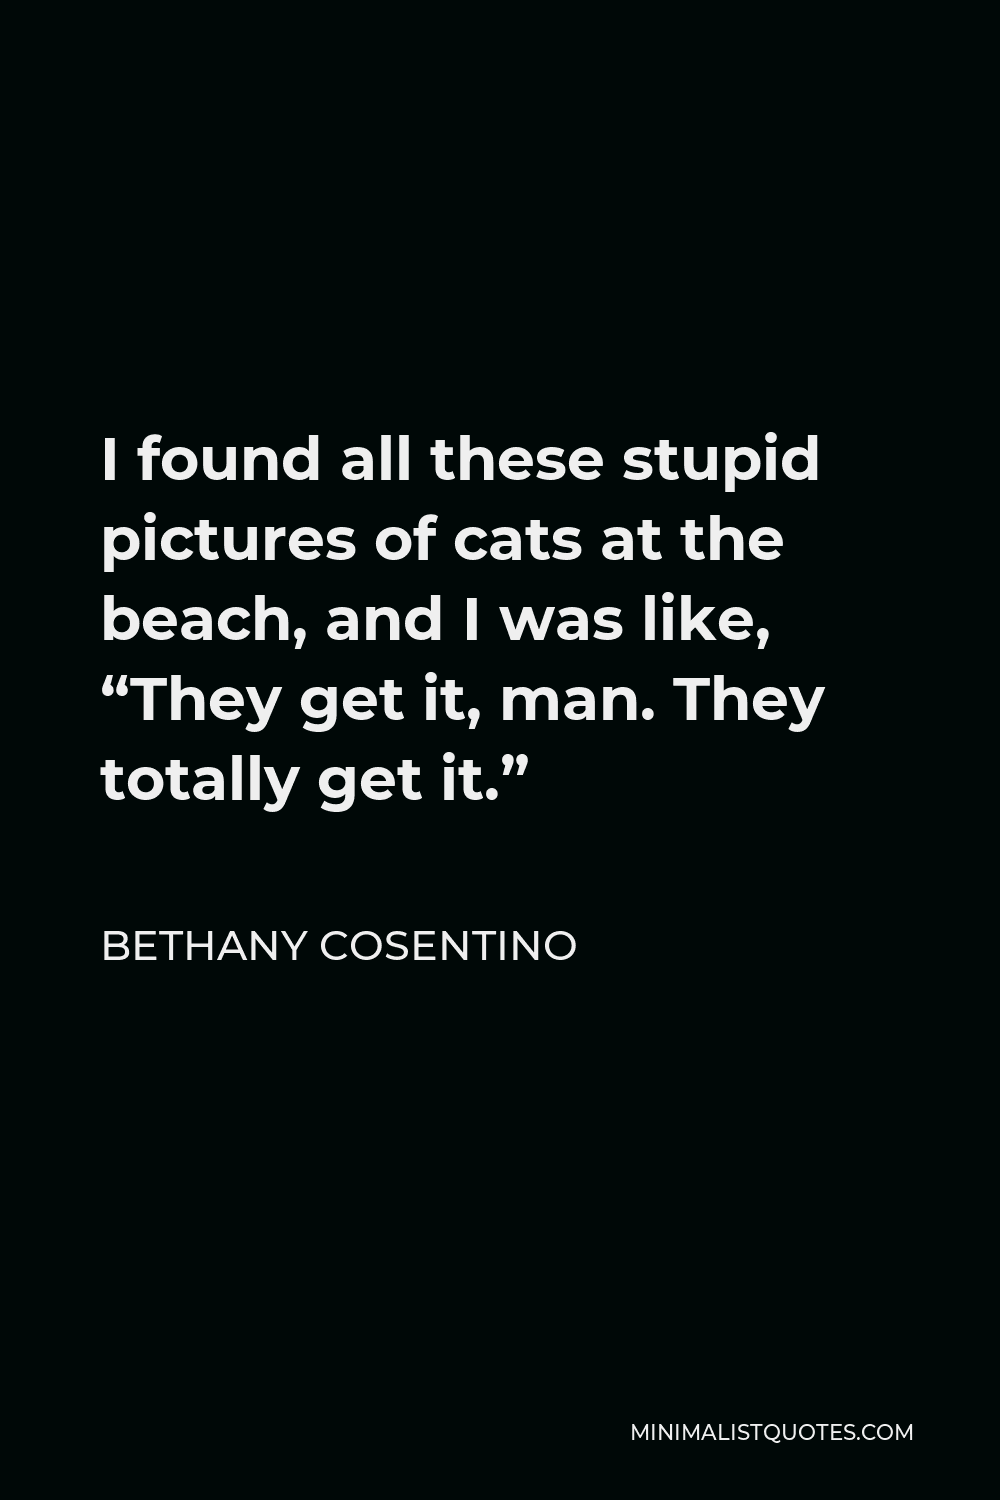 Bethany Cosentino Quote - I found all these stupid pictures of cats at the beach, and I was like, “They get it, man. They totally get it.”